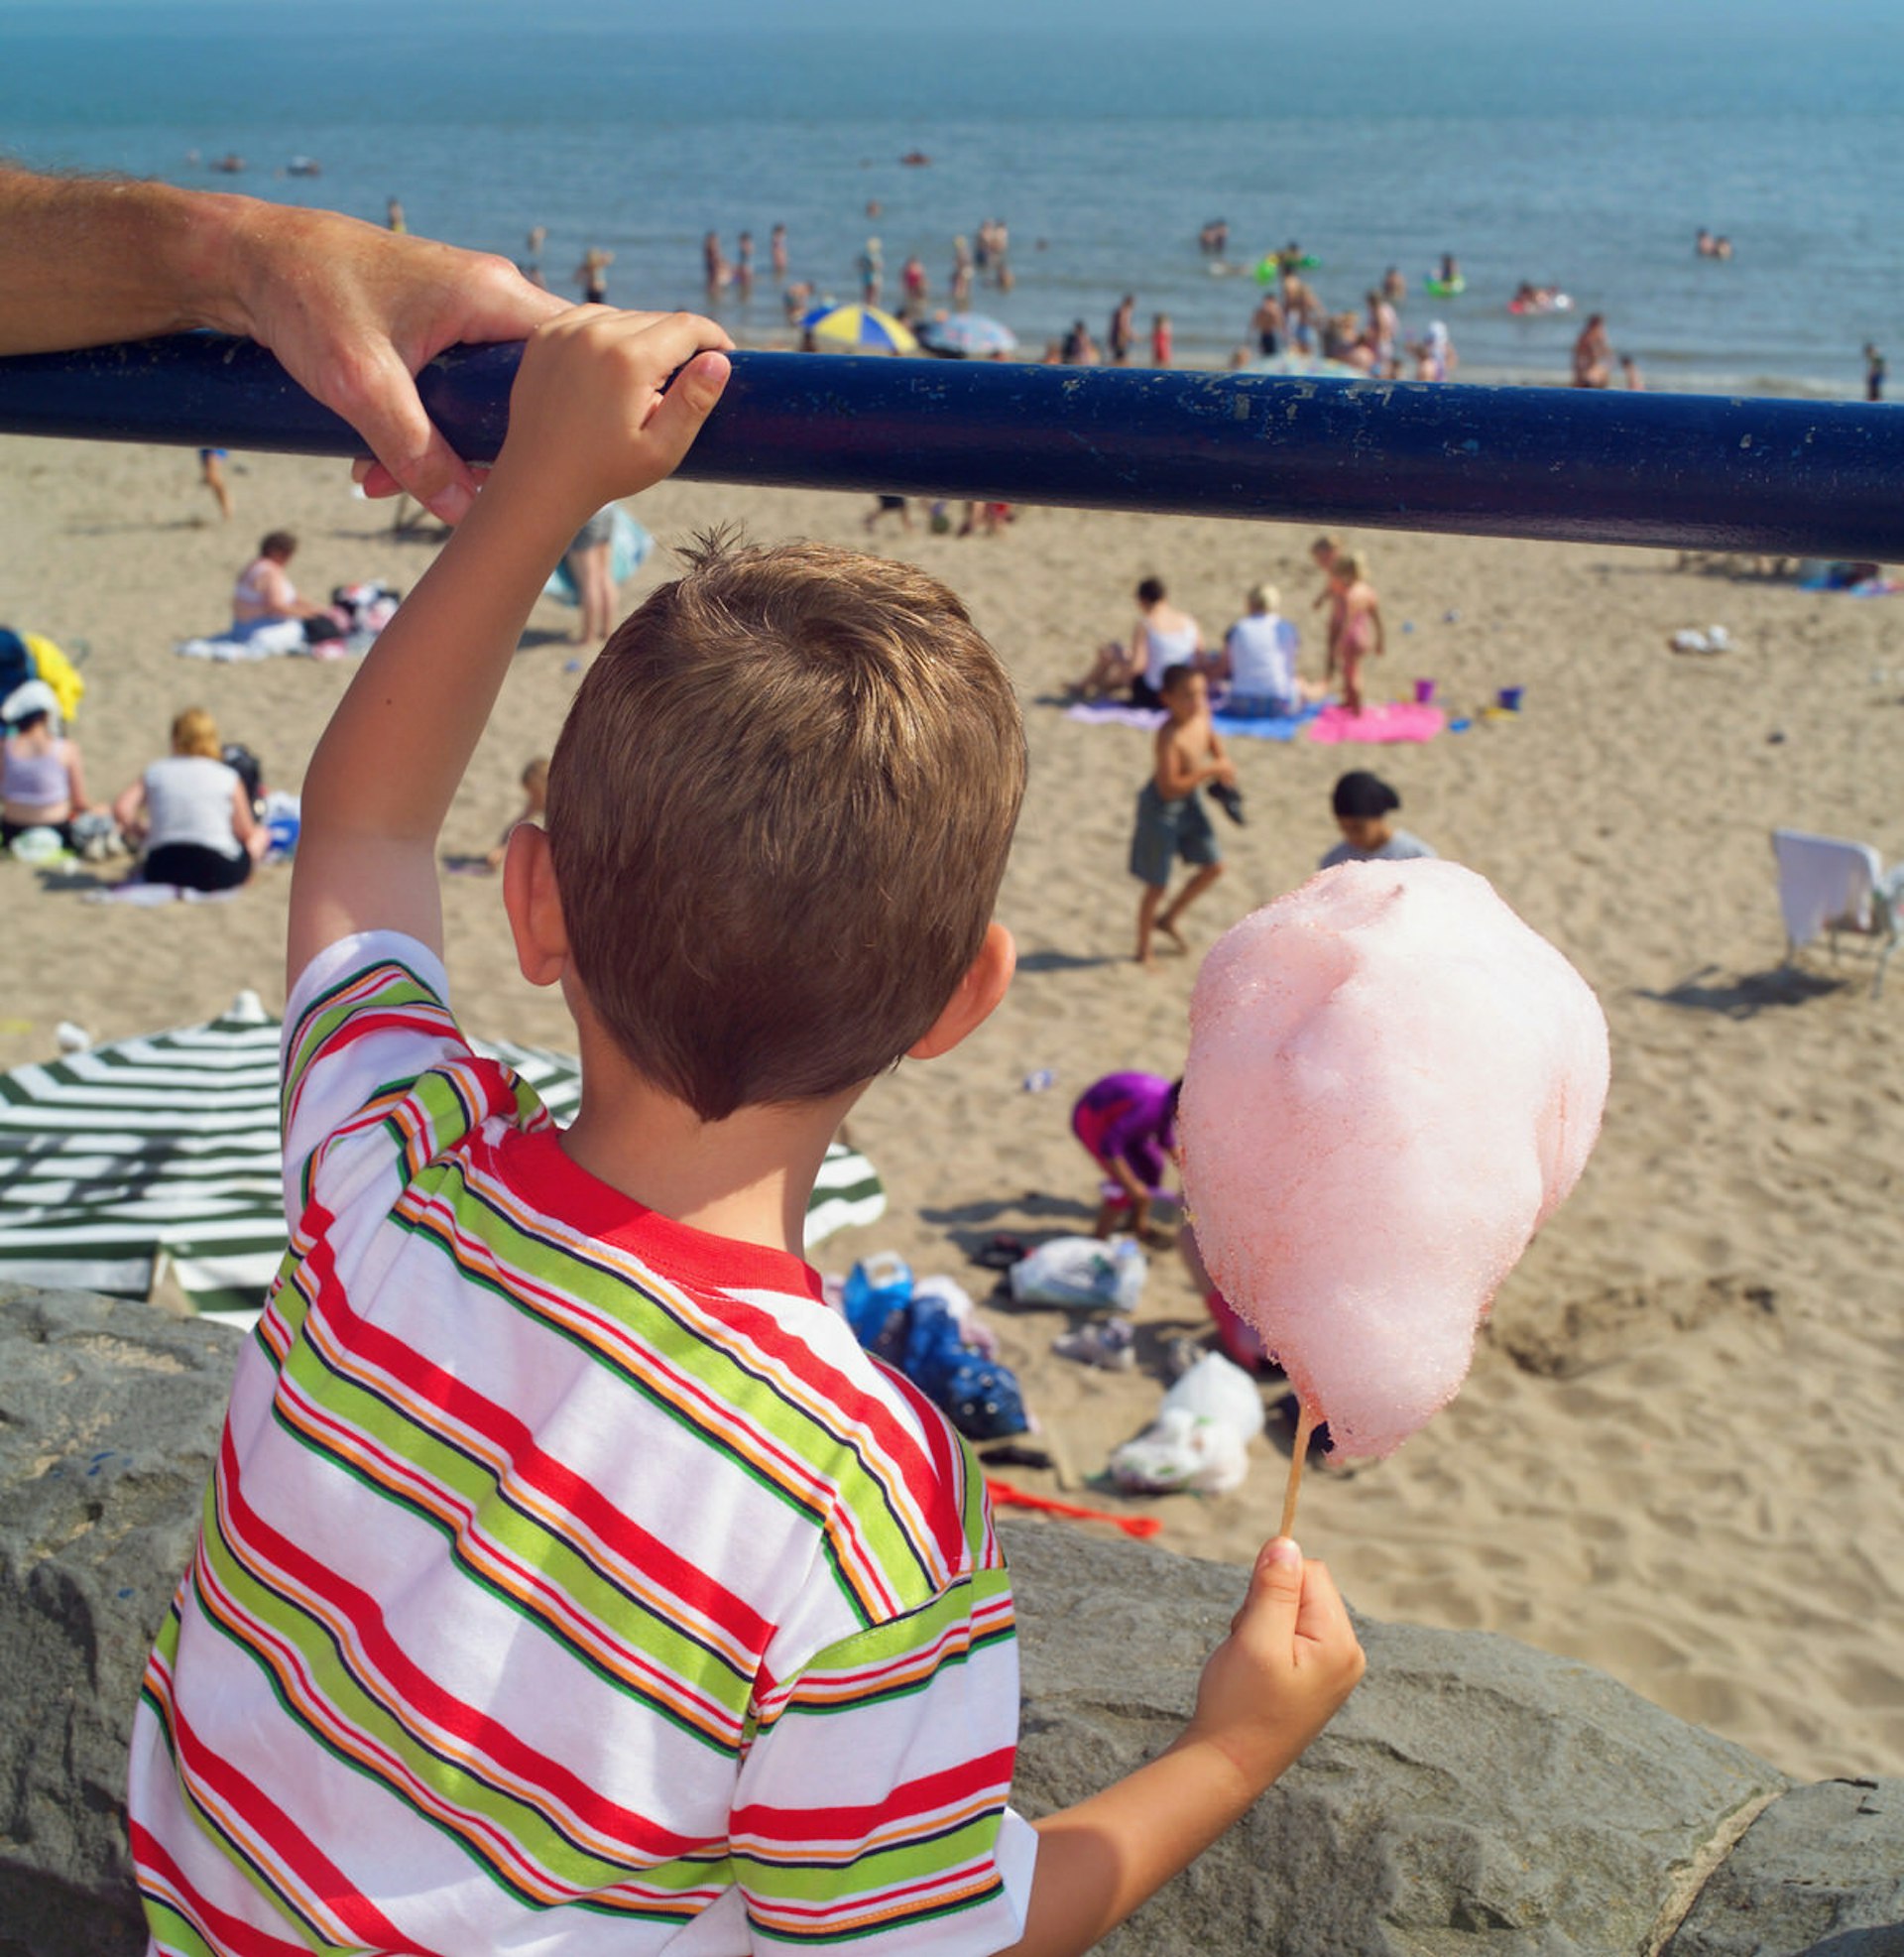 Classic seaside action on Wales' Barry Island, with pink candyfloss foregrounded against a mellow beach scene © Phil Boorman / Stockbyte / Getty Images